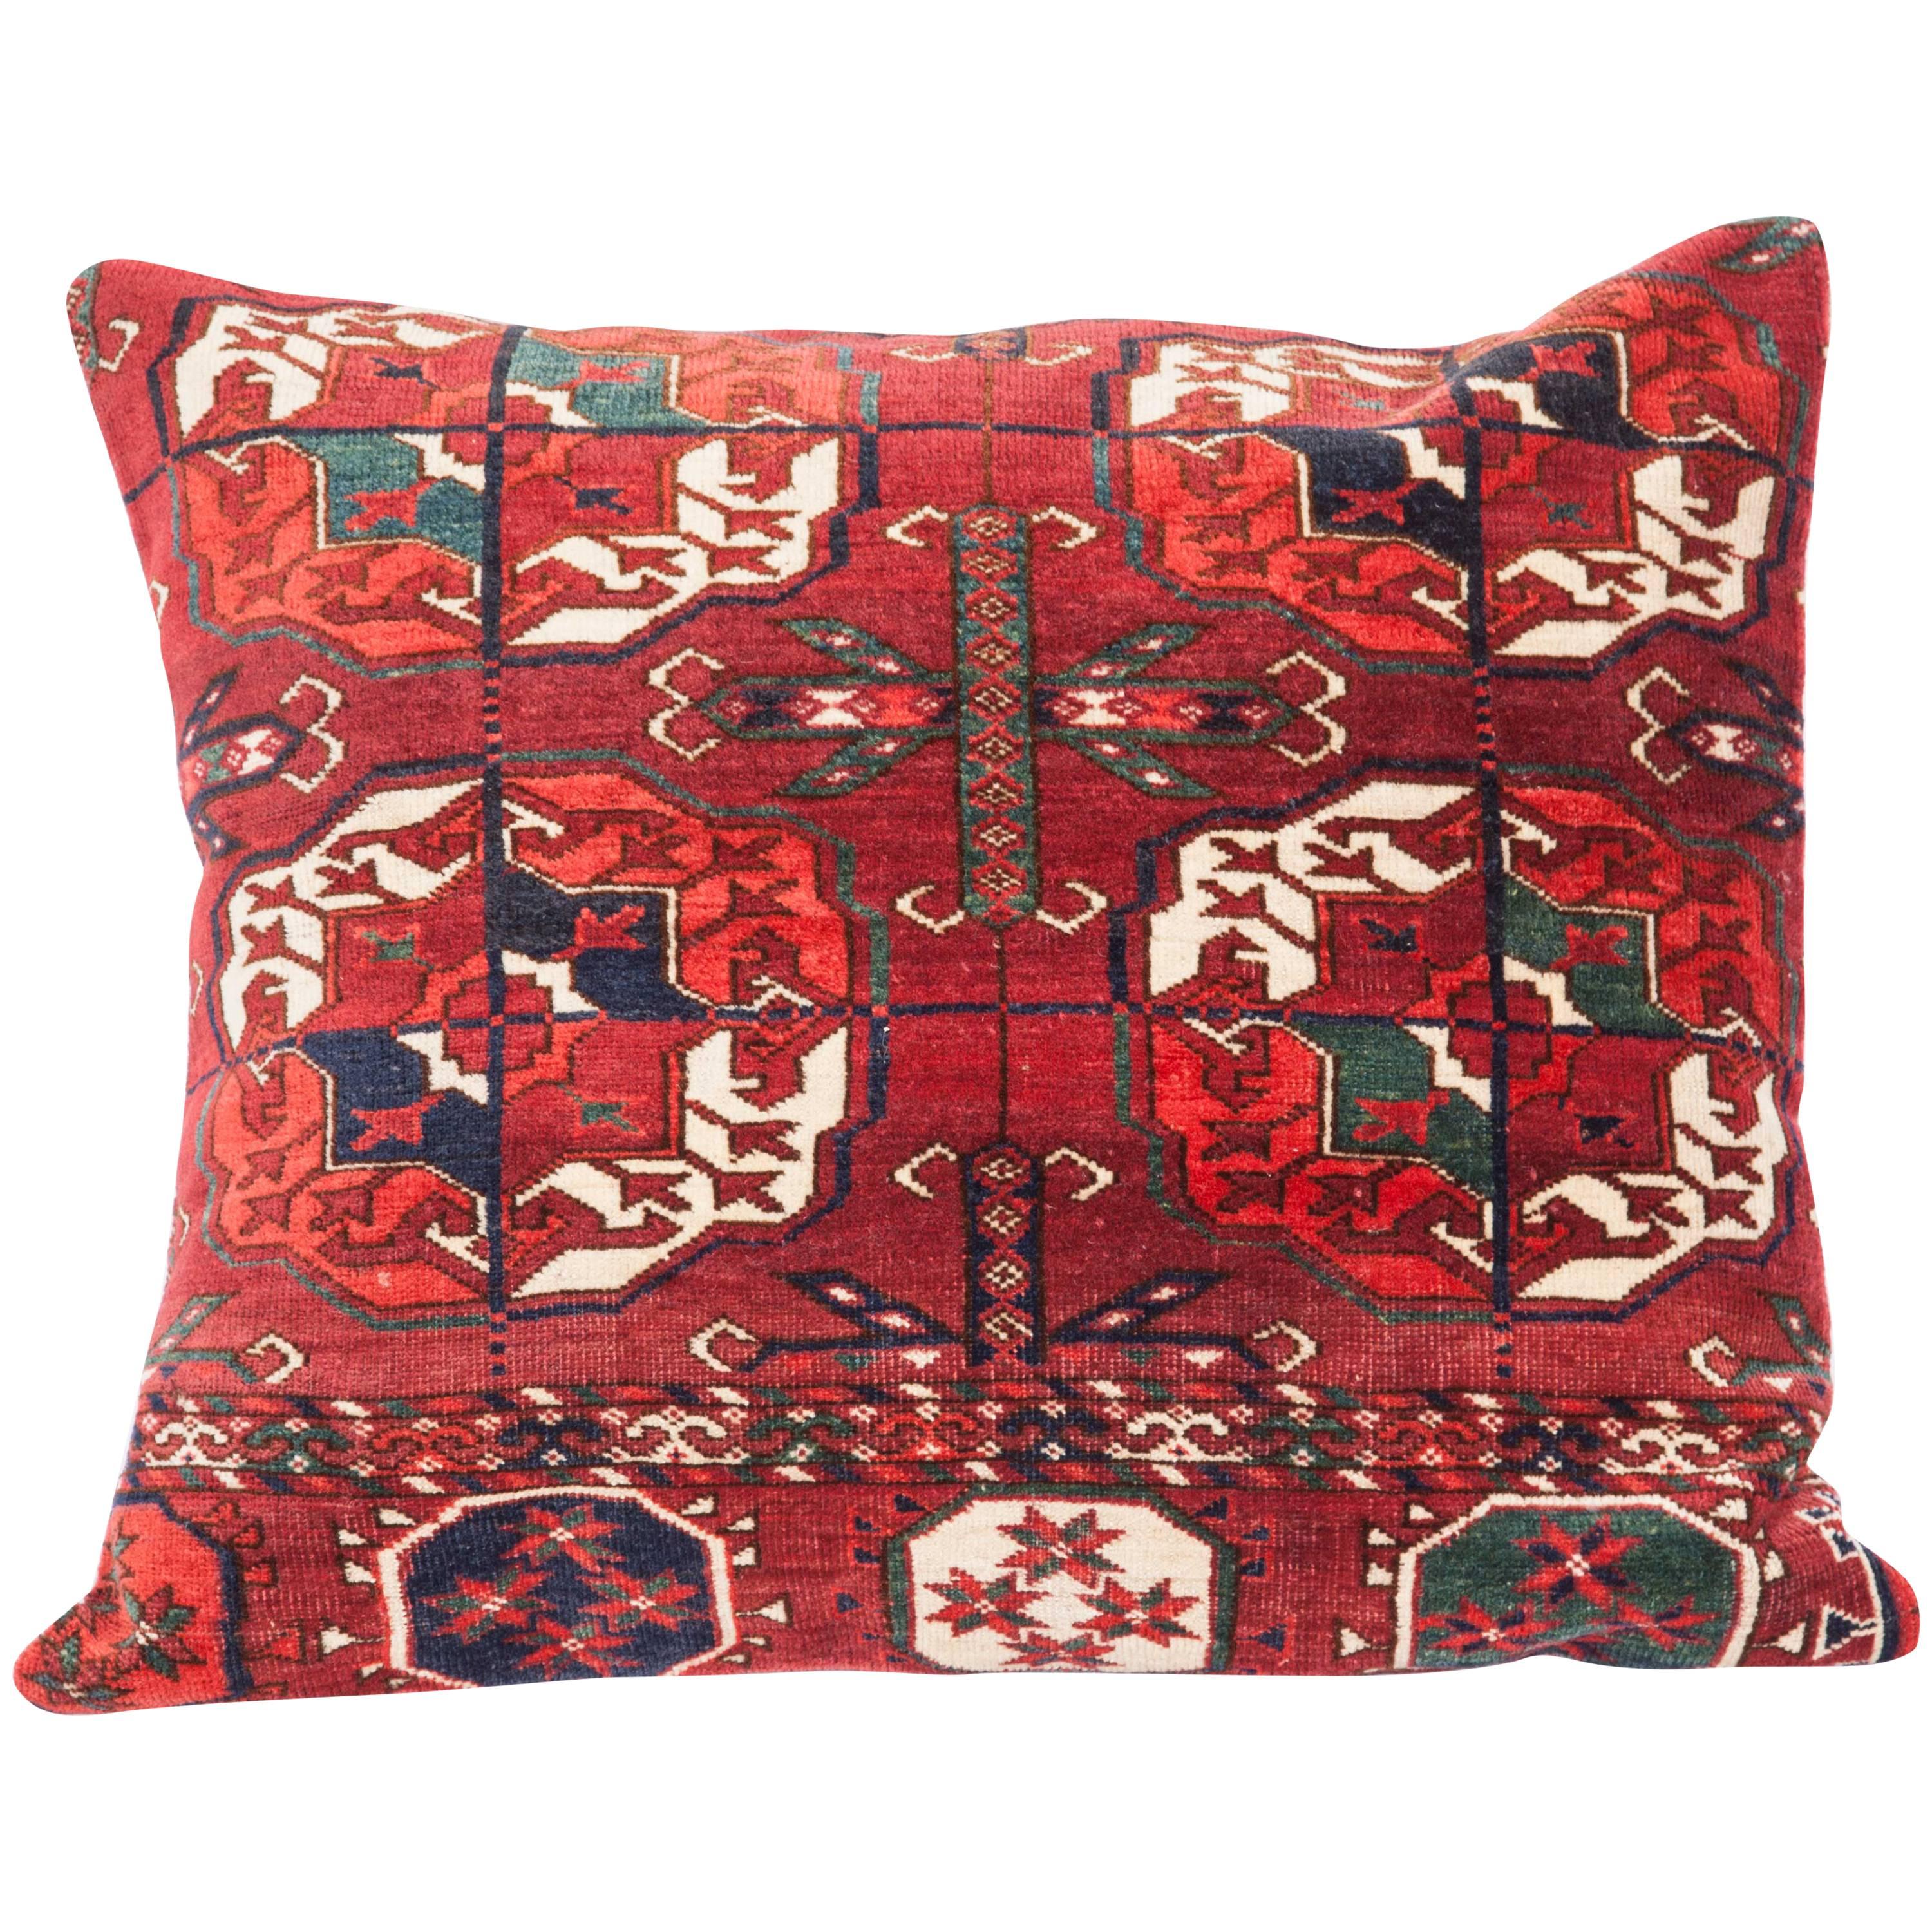 Antique Pillow with Velvet like Texture Made Out of a Turkmen Rug